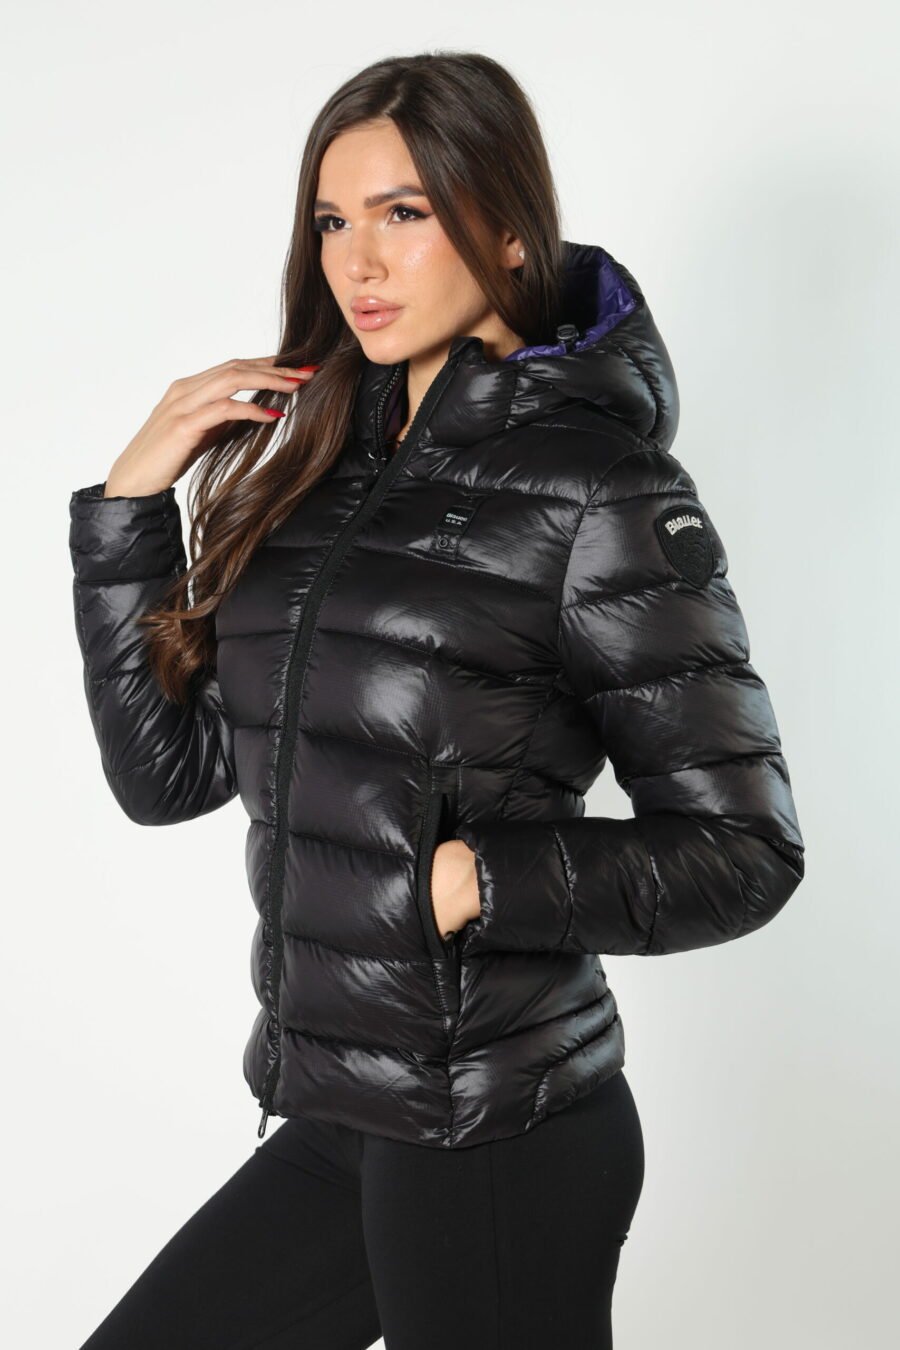 Black straight lined hooded jacket with purple inside with logo patch - 8052865435499 273 scaled